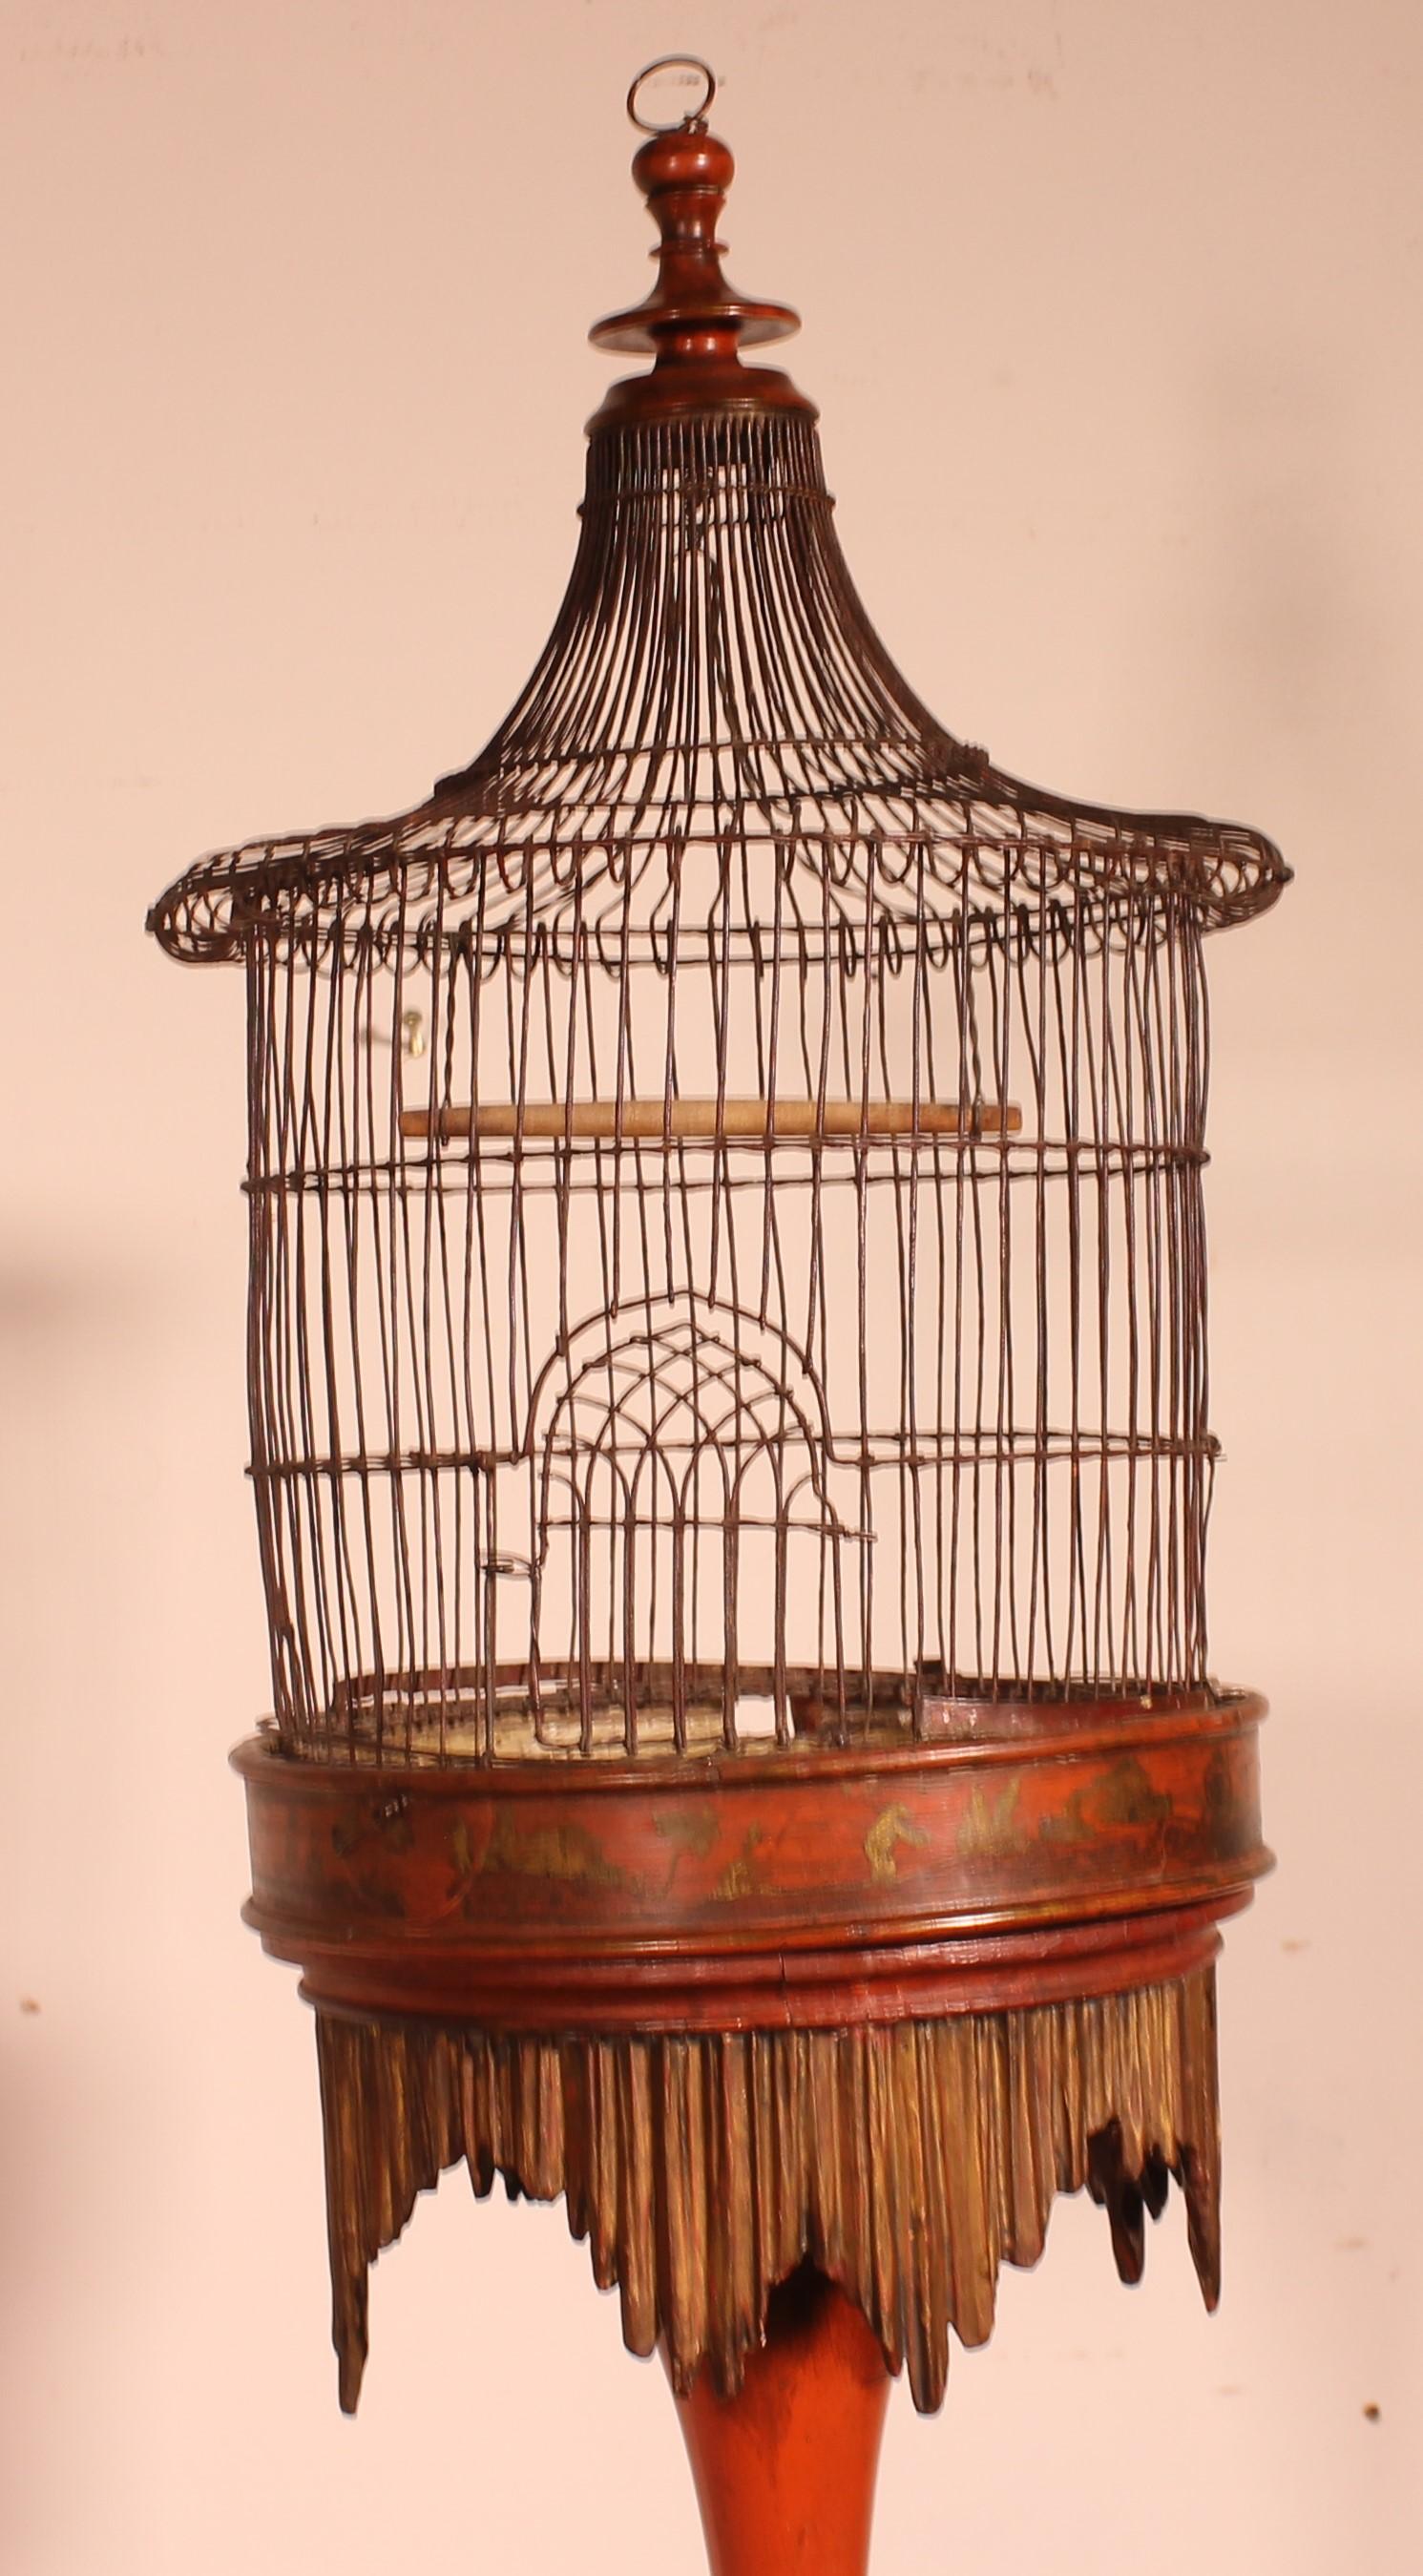 Elegant 19th century bird cage with Chinese decoration
Very beautiful unique bird cage with a superb base
Atypical piece with an Asian influence, but also elements of the Renaissance with the base.
Very beautiful patina and in very good condition.